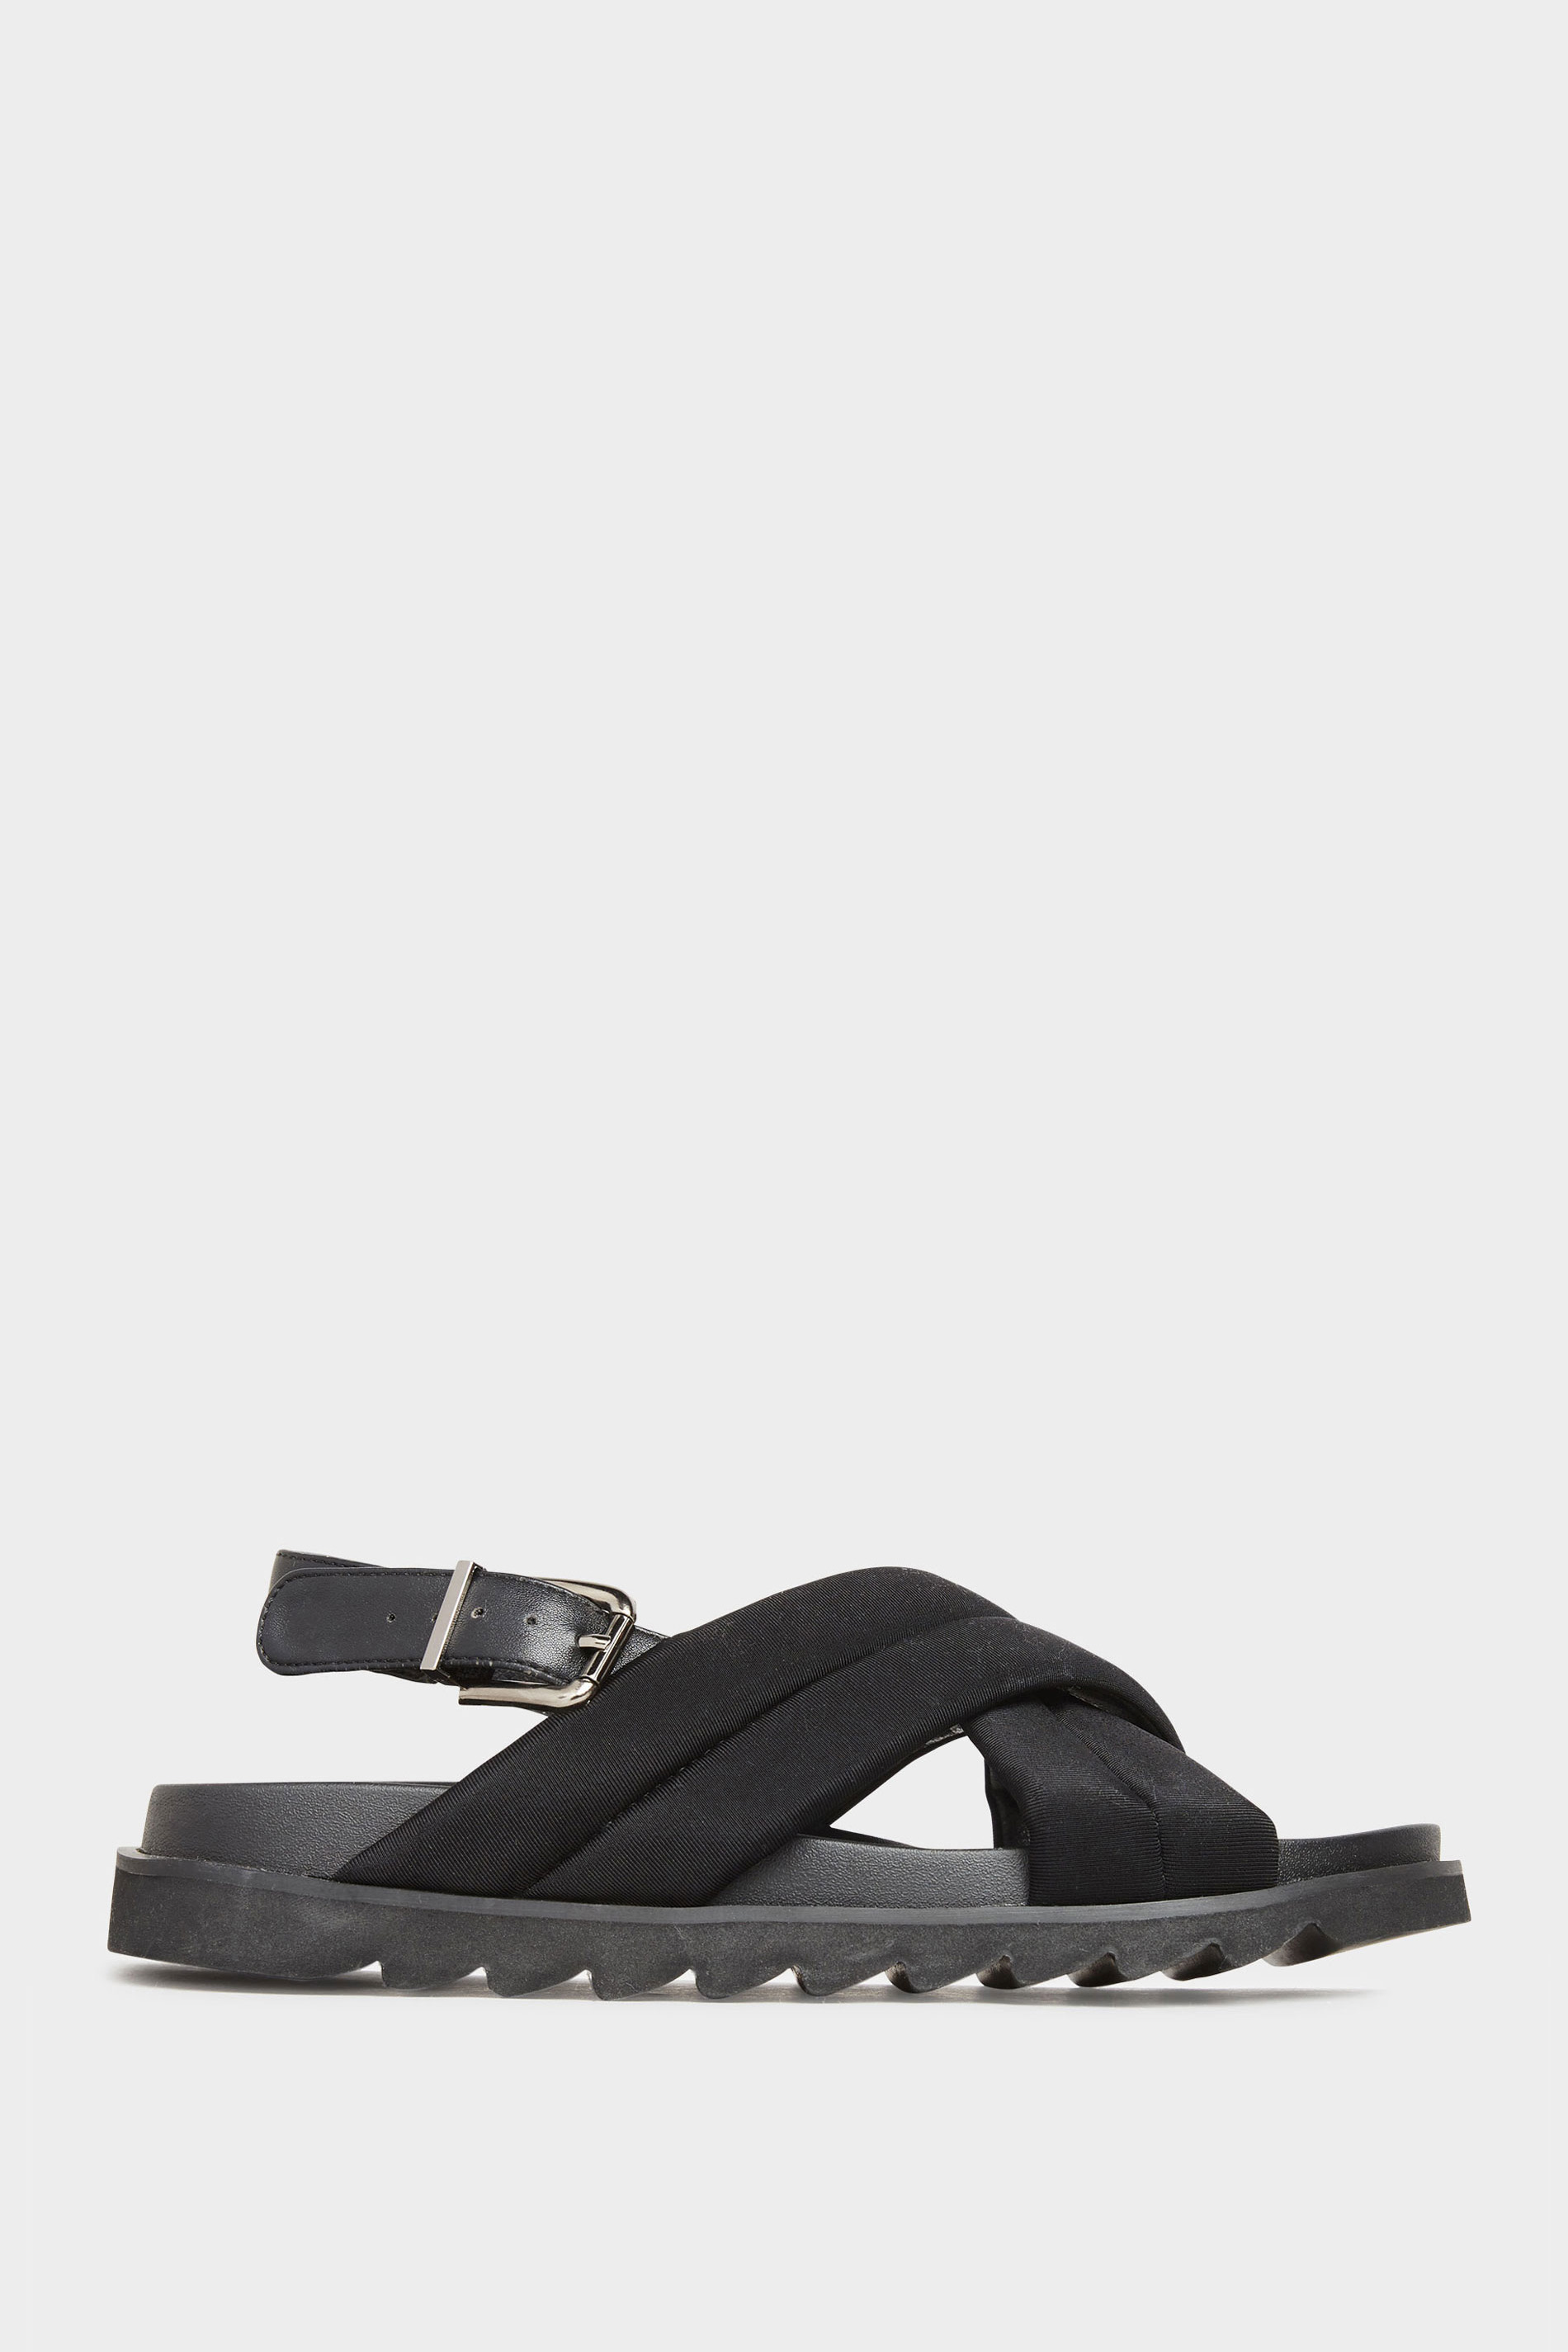 LIMITED COLLECTION Black Padded Sandals In Extra Wide Fit | Yours Clothing 2